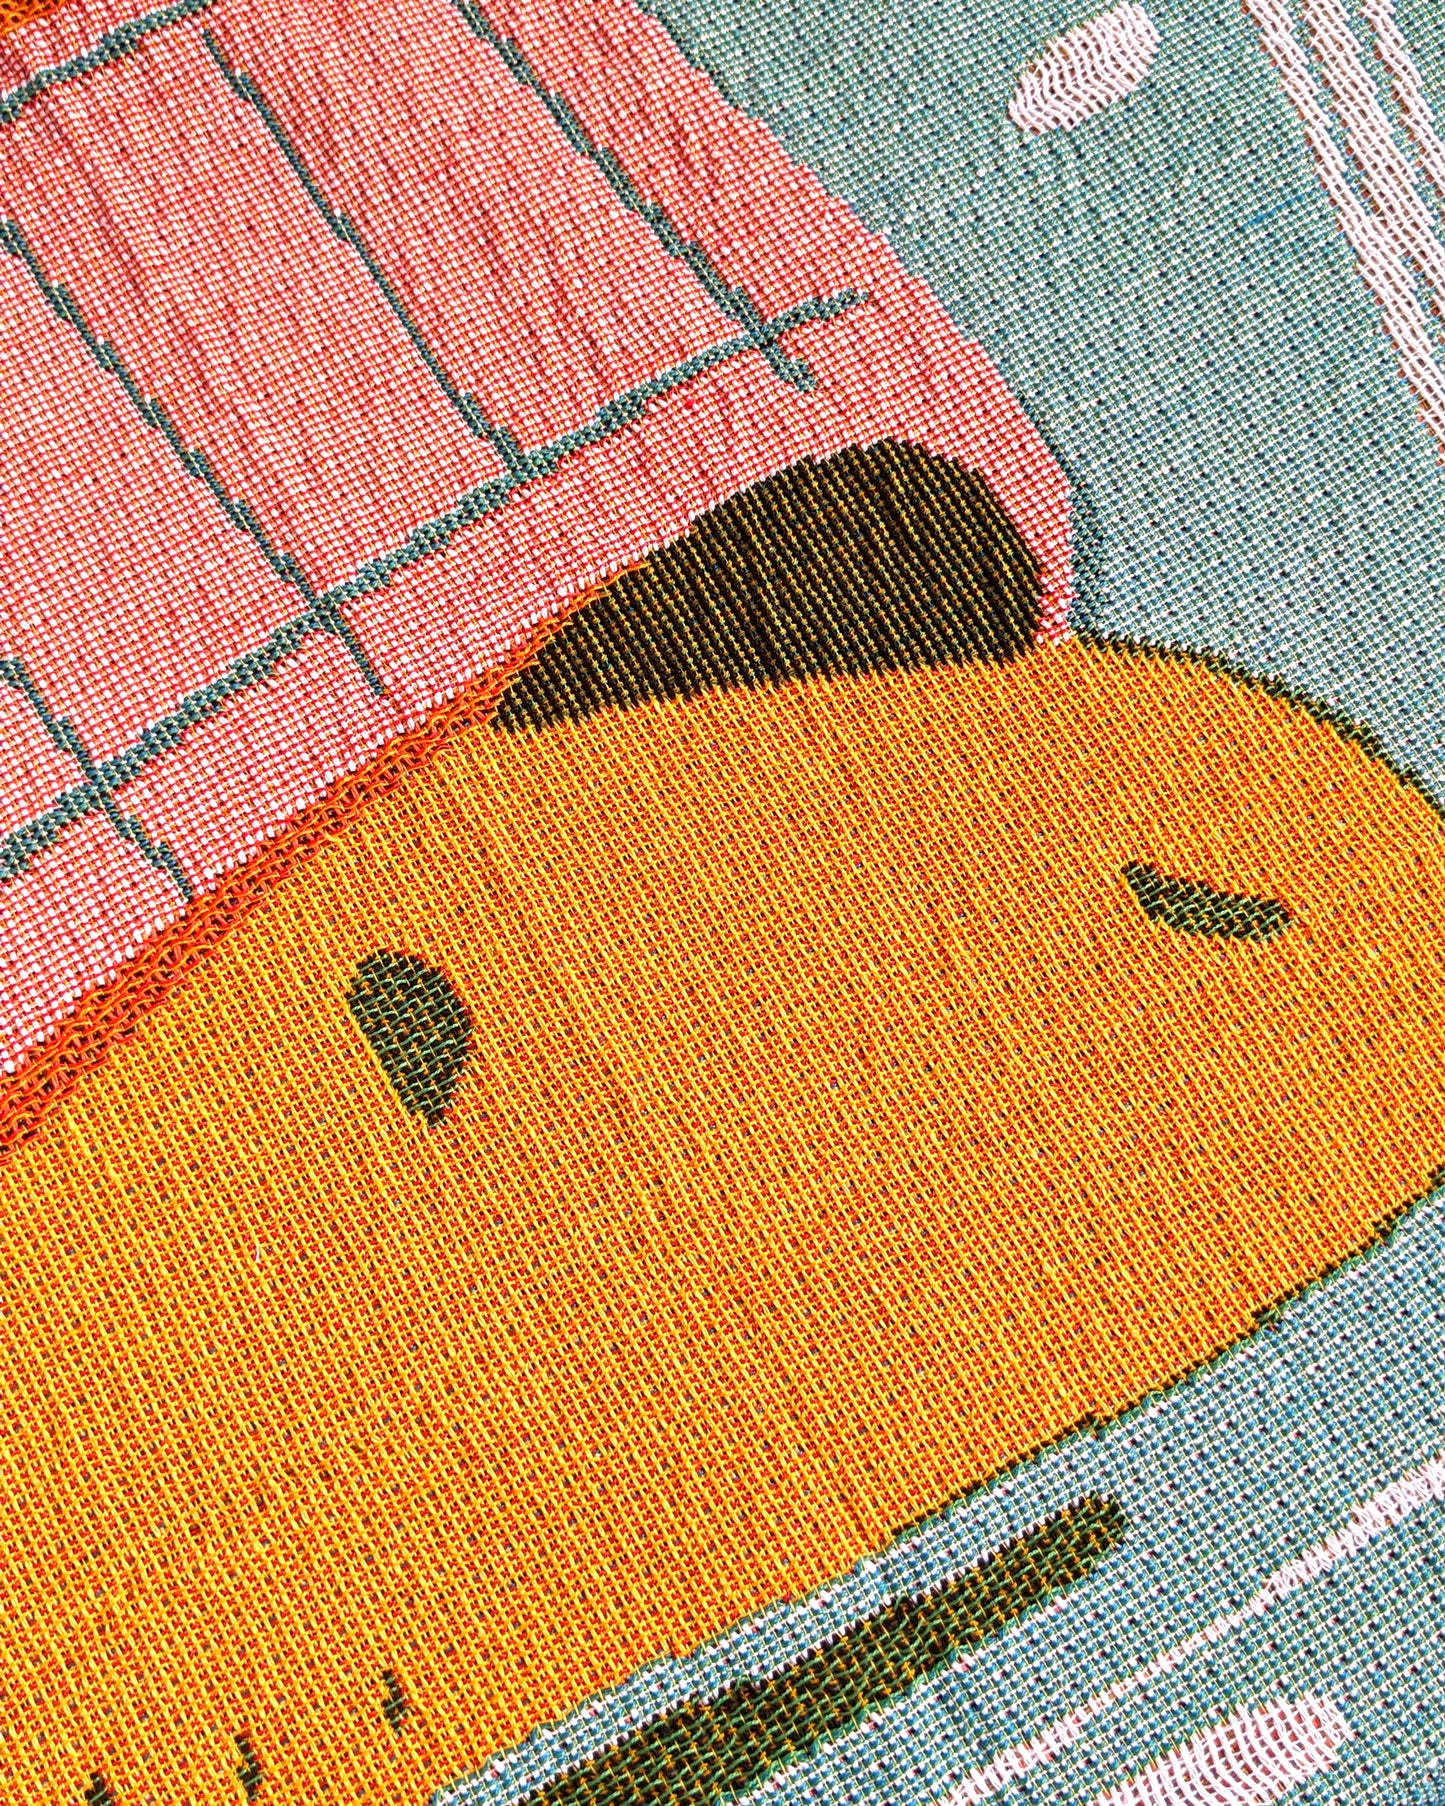 Capybaras and Oranges - Tapestry Throw Blanket